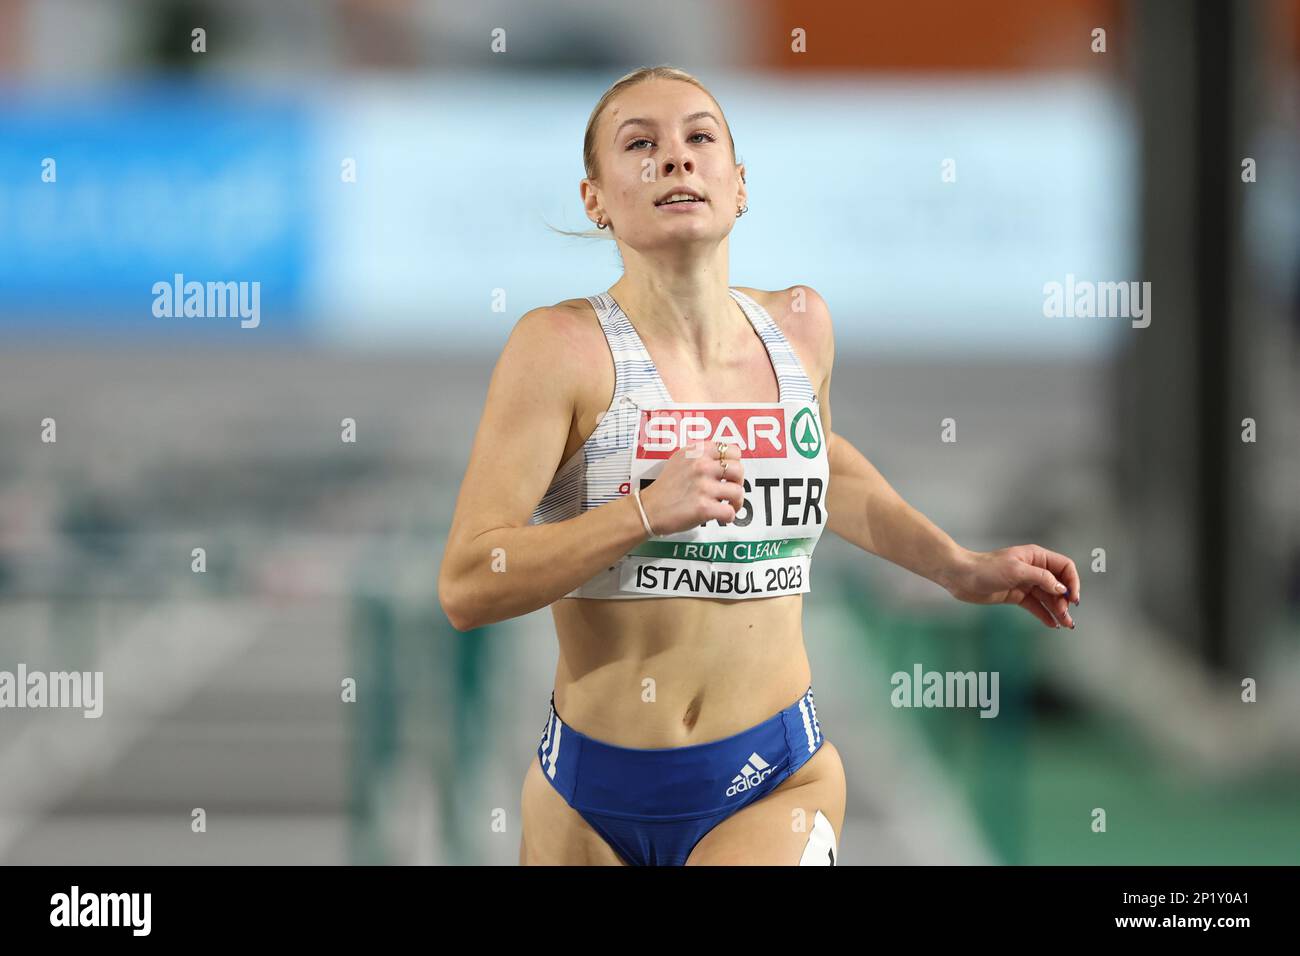 Viktoria Forster, of Slovakia, reacts after finishing a Women 60 meters Hurdles heat at the European Athletics Indoor Championships at Atakoy Arena in Istanbul, Turkey, Saturday, March 4, 2023